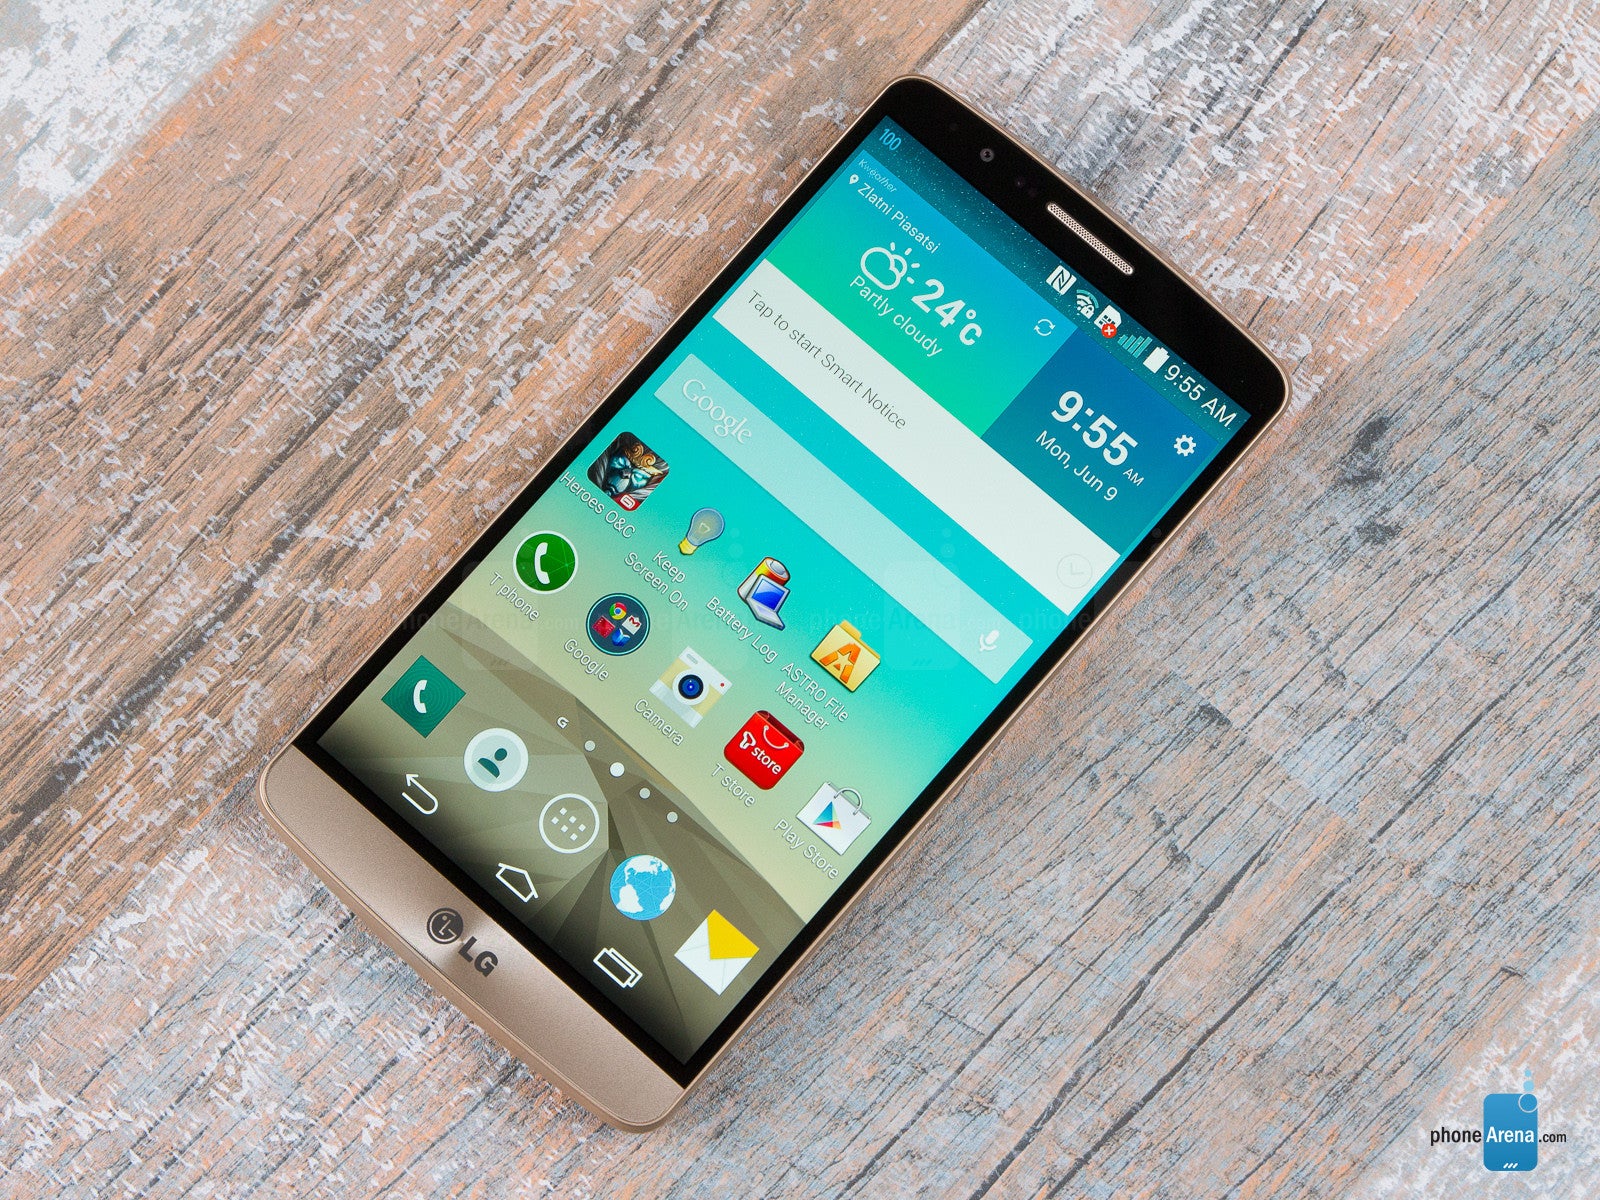 The defining features of 2014's high-end Android smartphones